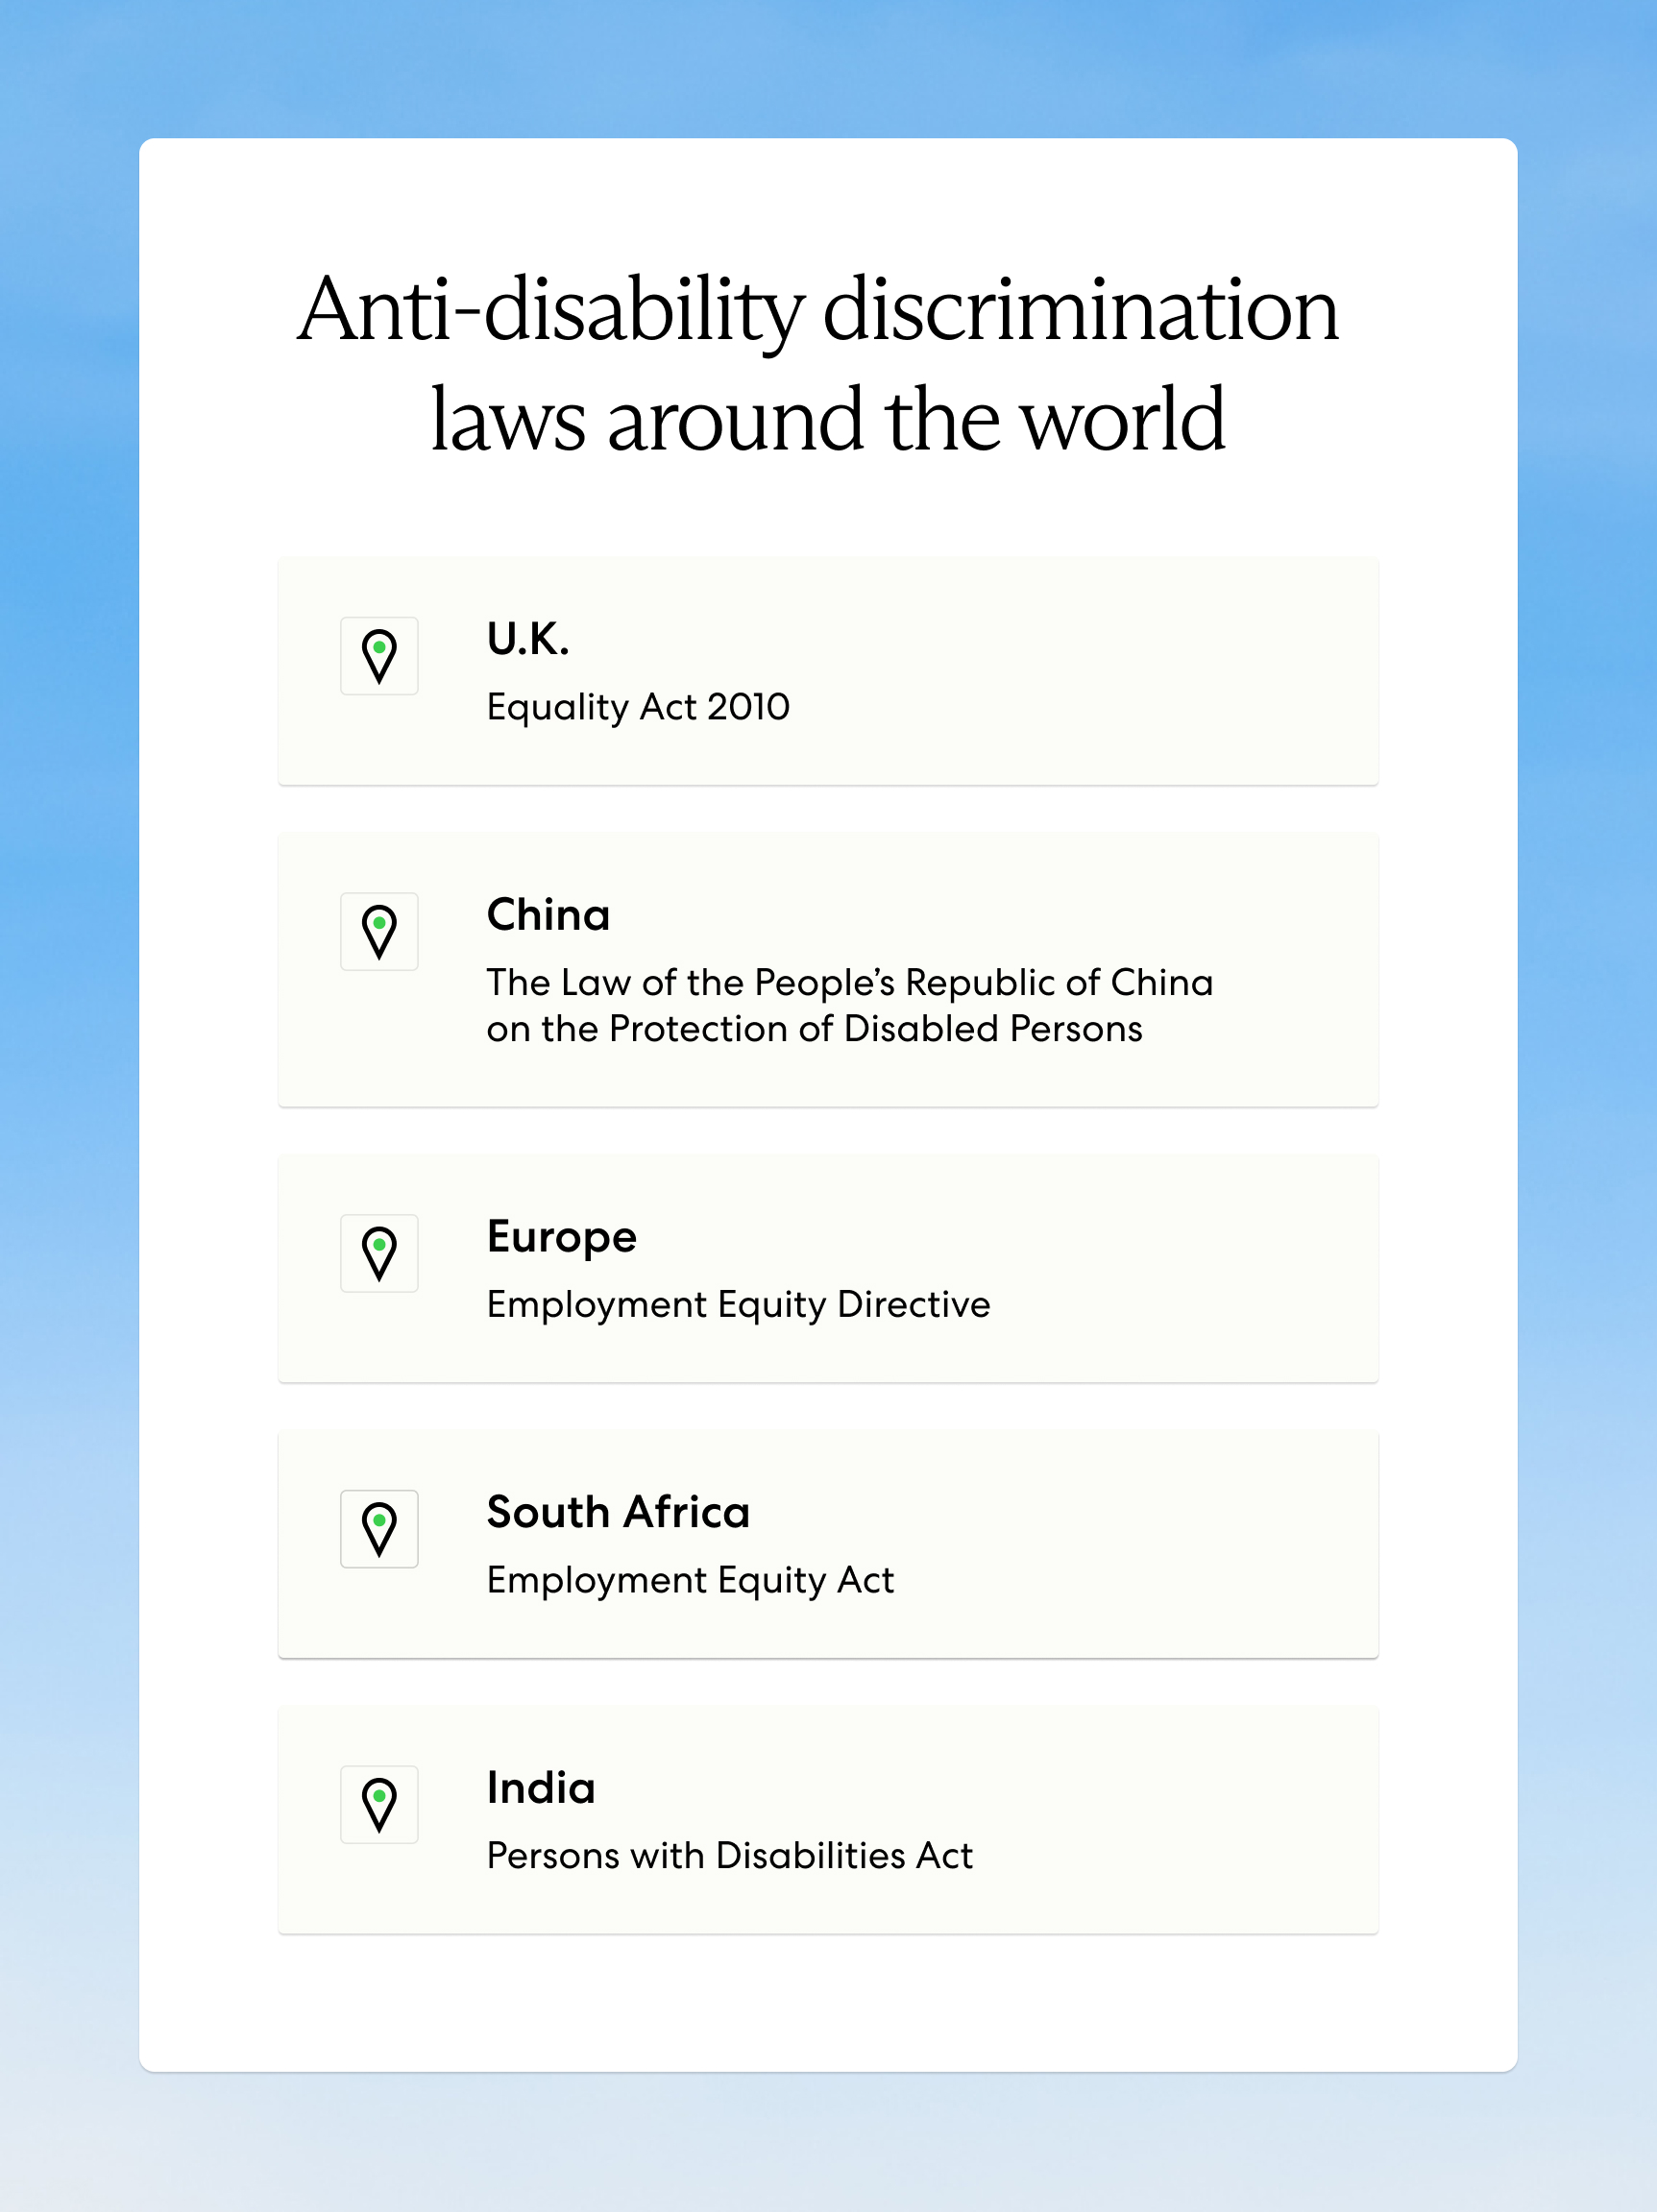 Anti-disability discrimination laws around the world - Equality Act 2010 (U.K.), The Law of the People's Republic of China on the Protection of Disabled Persons (China), Employment Equity Directive (Europe), Employment Equity Act (South Africa), and the Persons with Disabilities Act (India) 